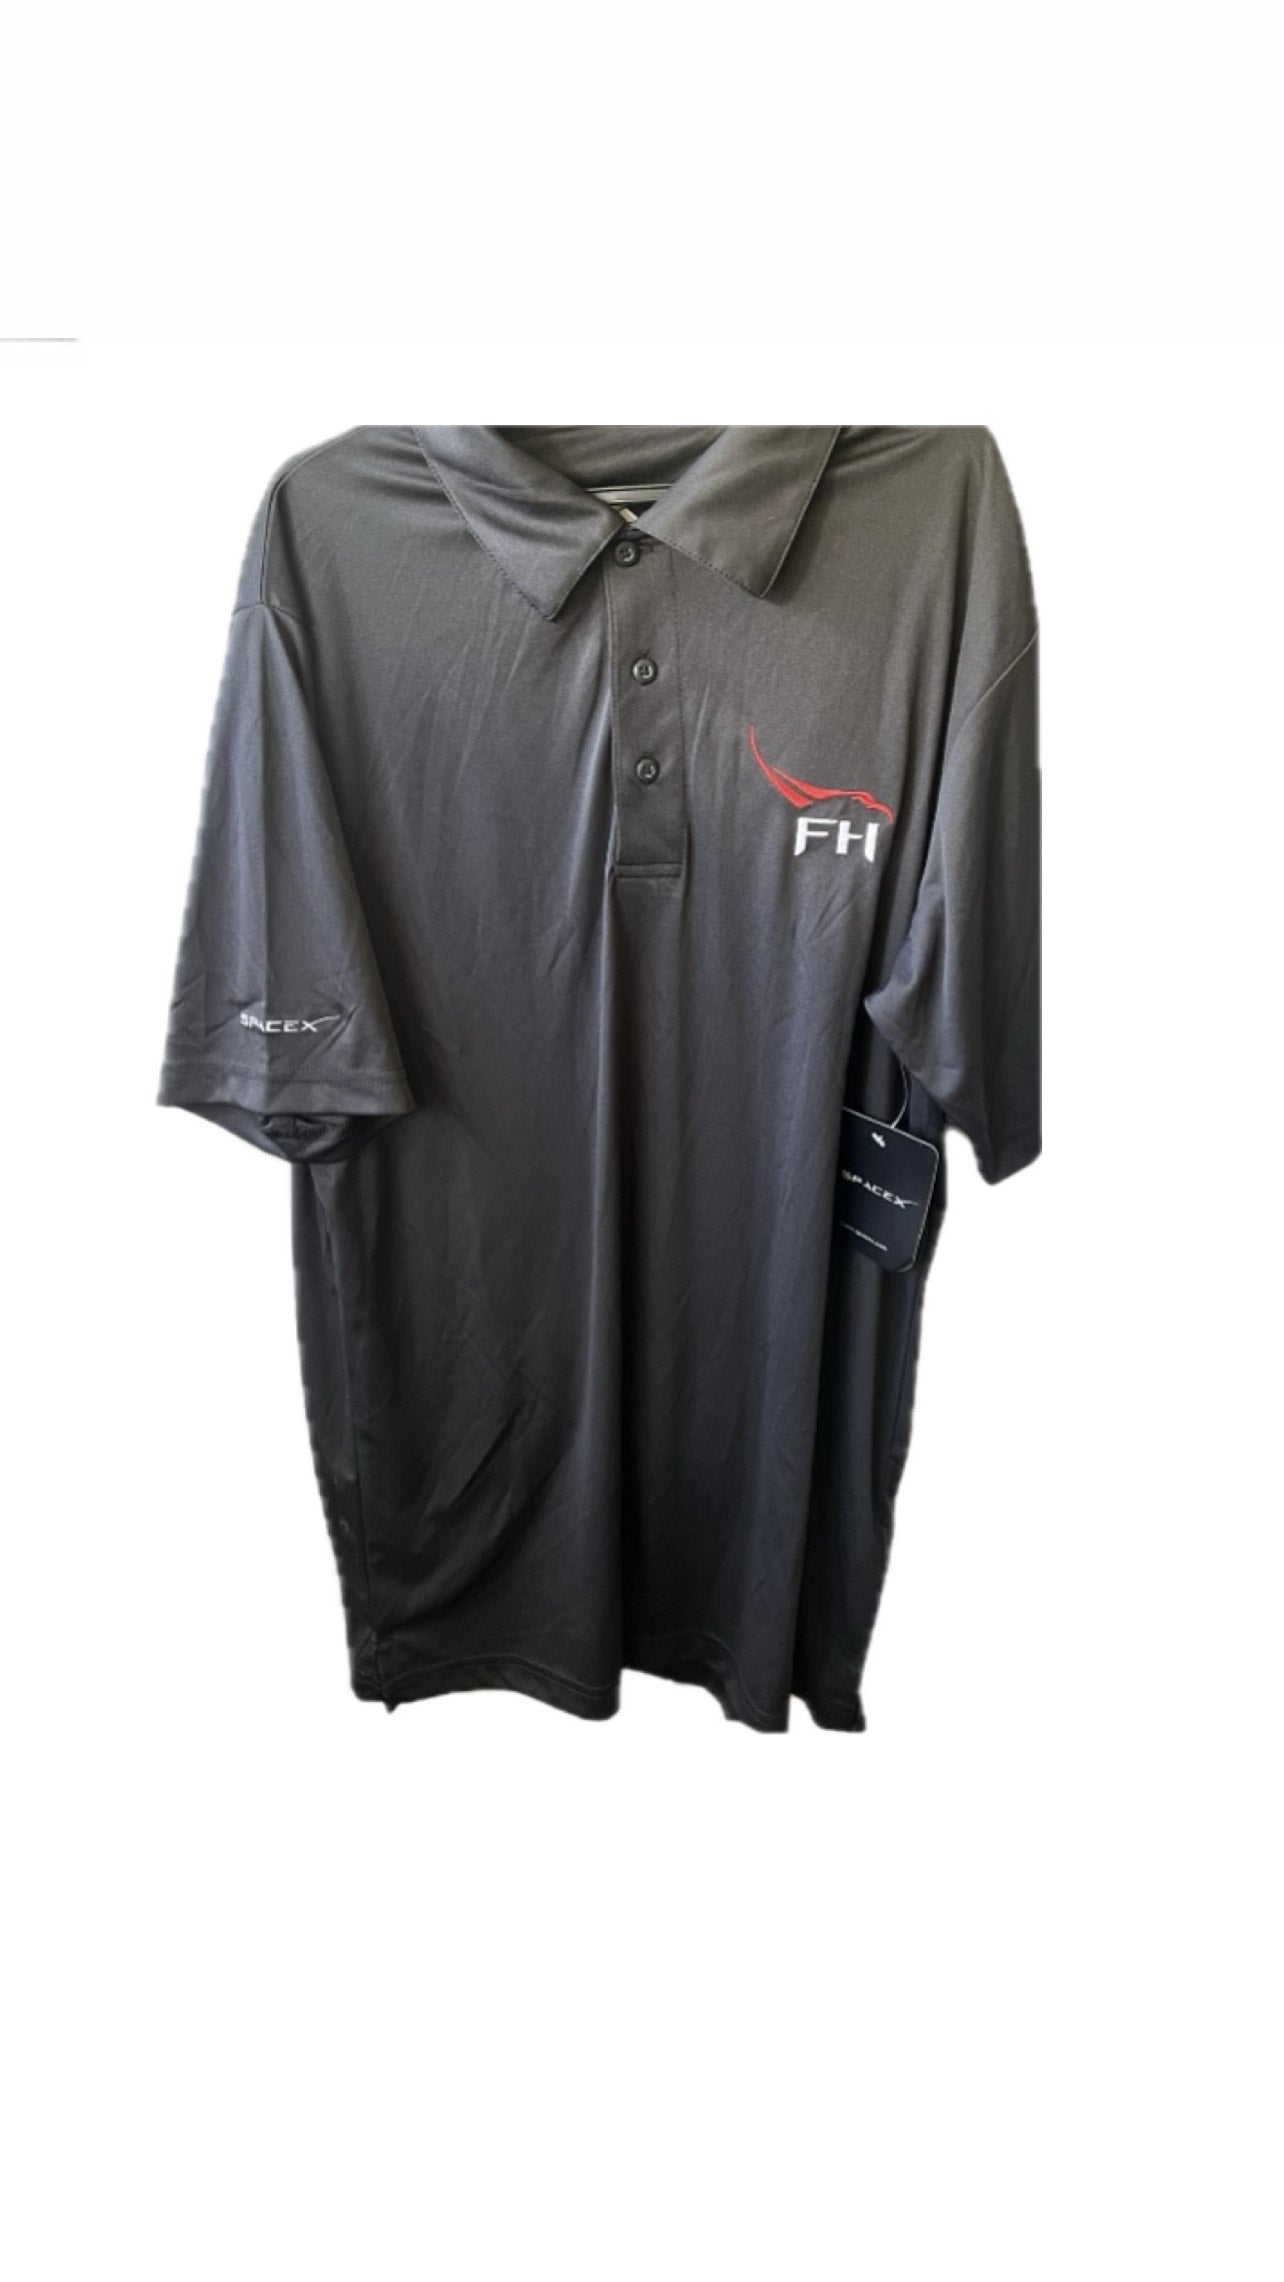 SpaceX Falcon Heavy Men's Polo - The Space Store